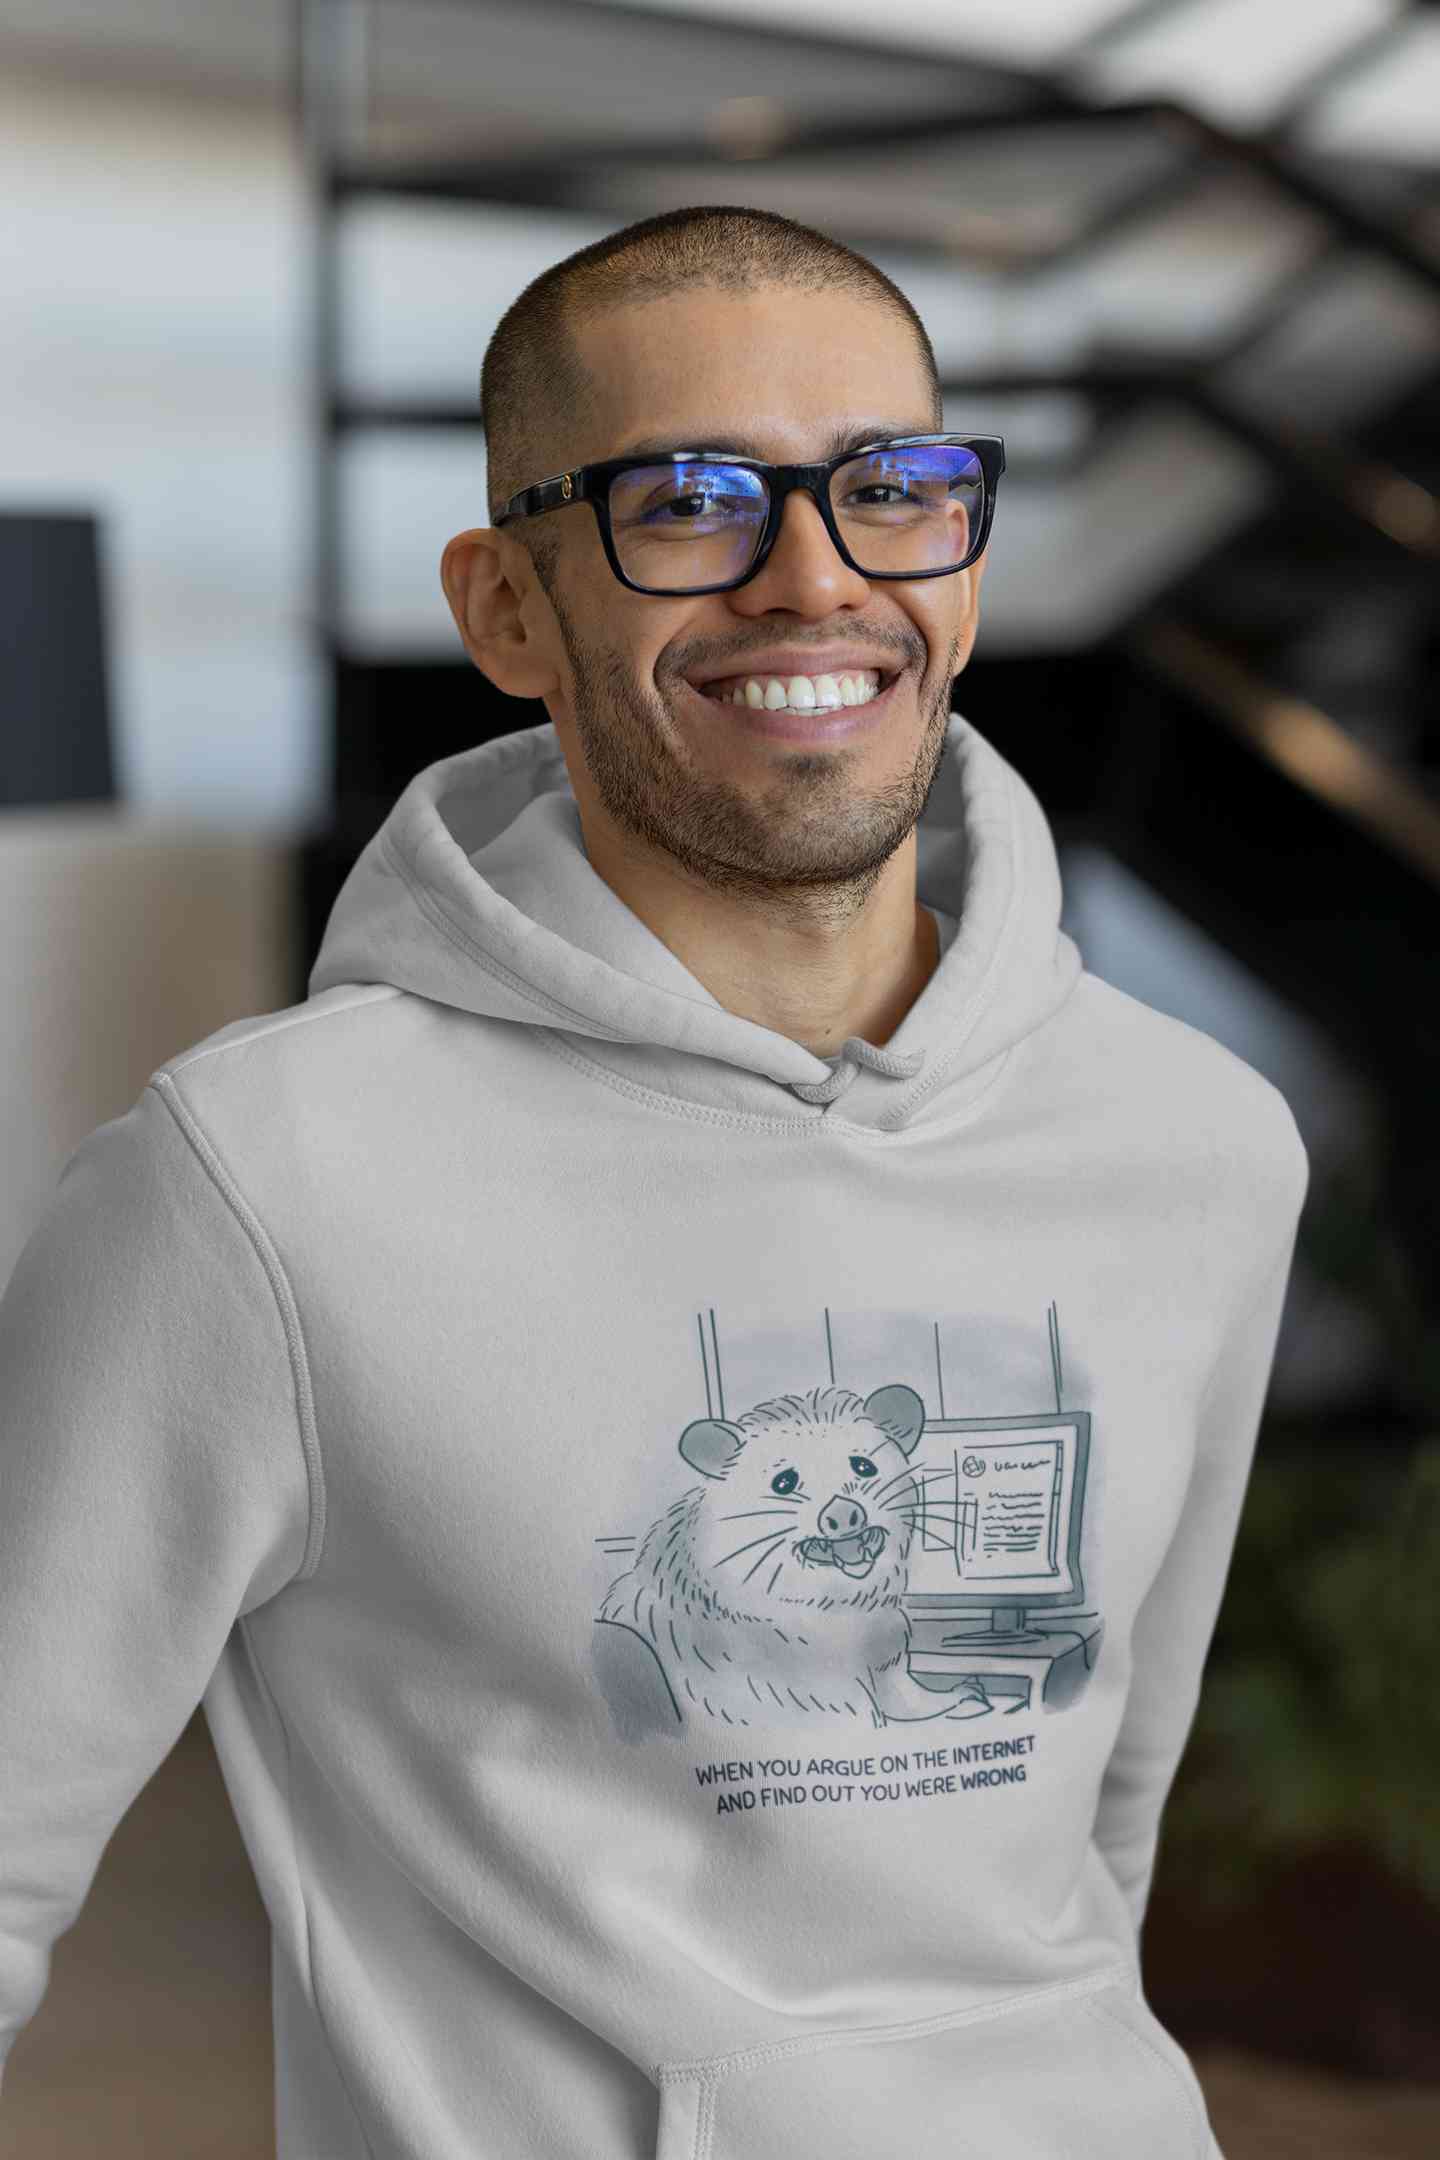 When You Argue On The Internet And Find Out You Were Wrong Funny Men Hoodies-FunkyTeesClub